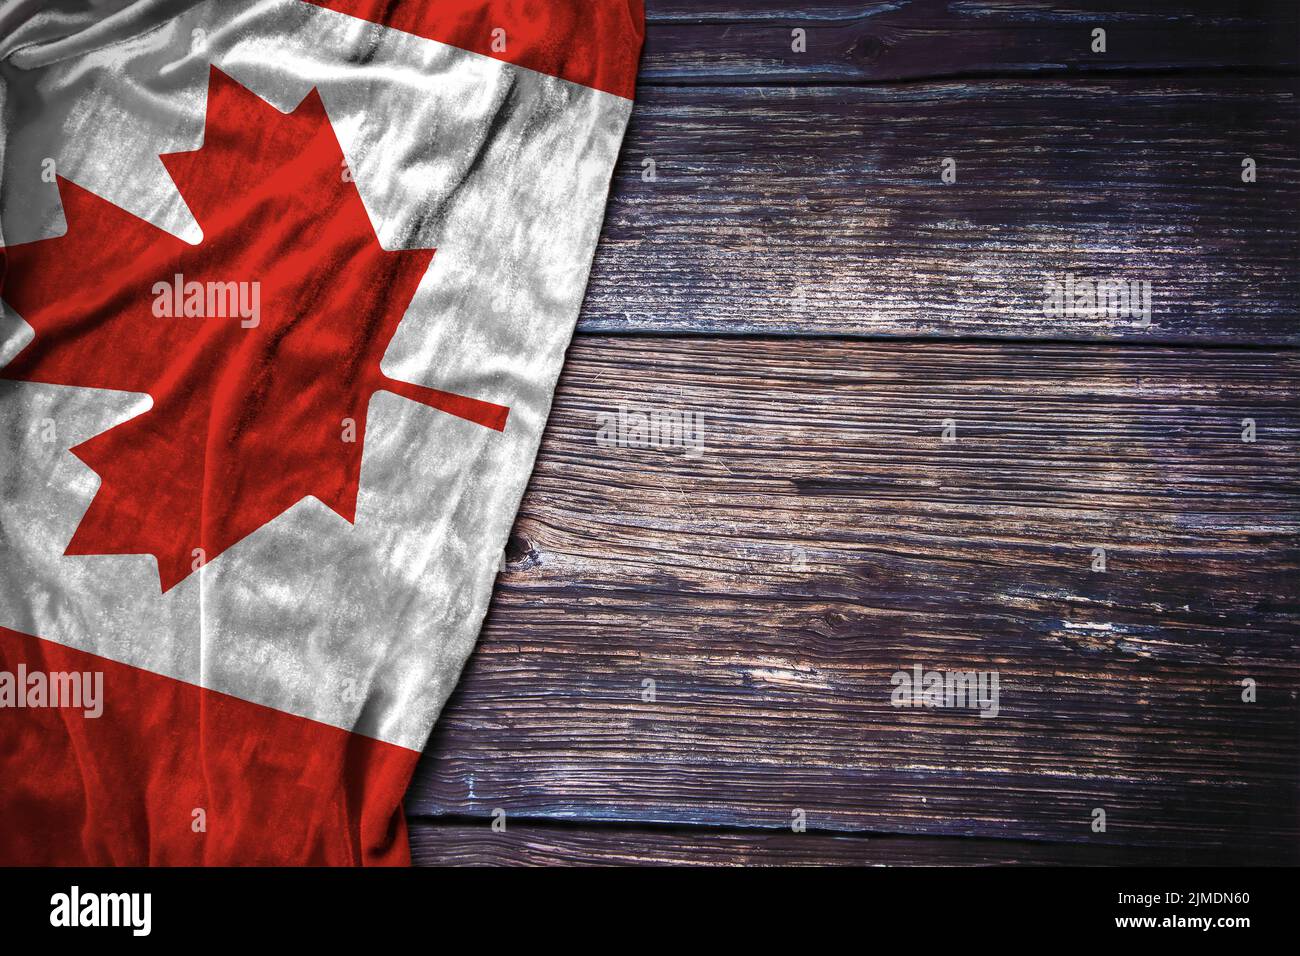 Canadian flag on rustic wooden background for Canada Day, Remembrance Day or Labor Day concept. Stock Photo